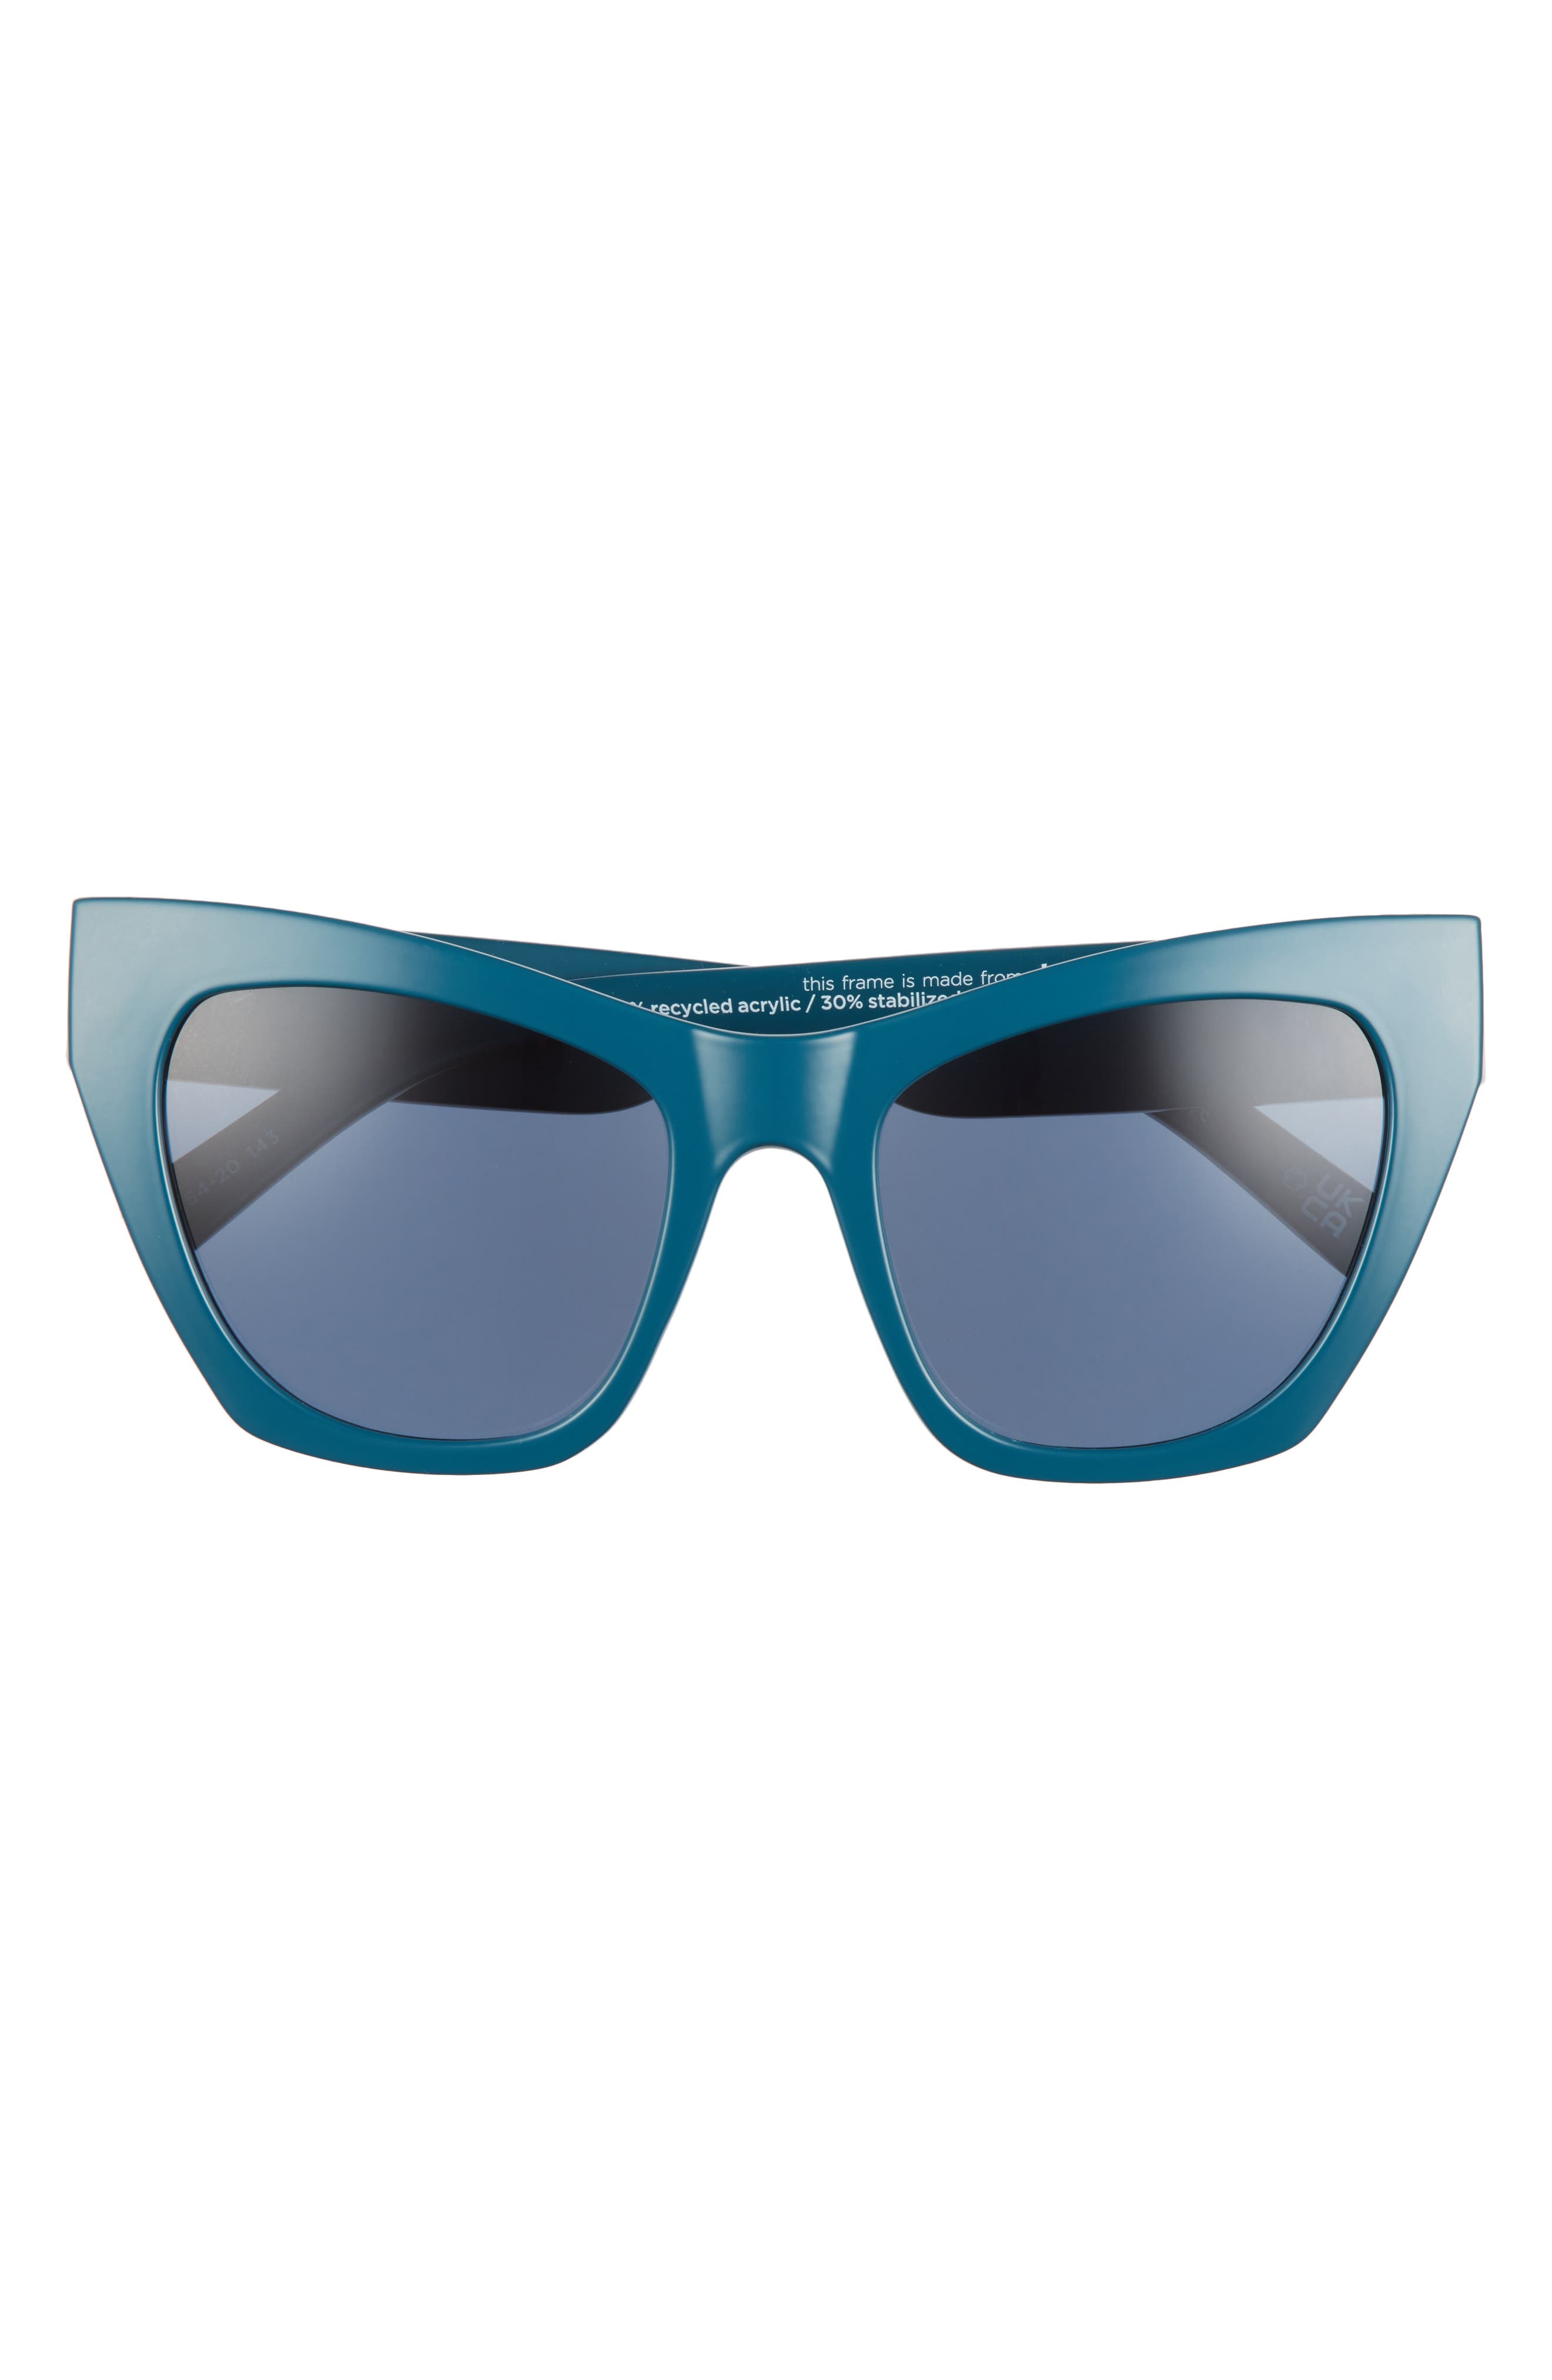 Le Specs So Sarplastic 54mm Cat Eye Sunglasses in Ink Teal /Blue Smoke Mono at Nordstrom